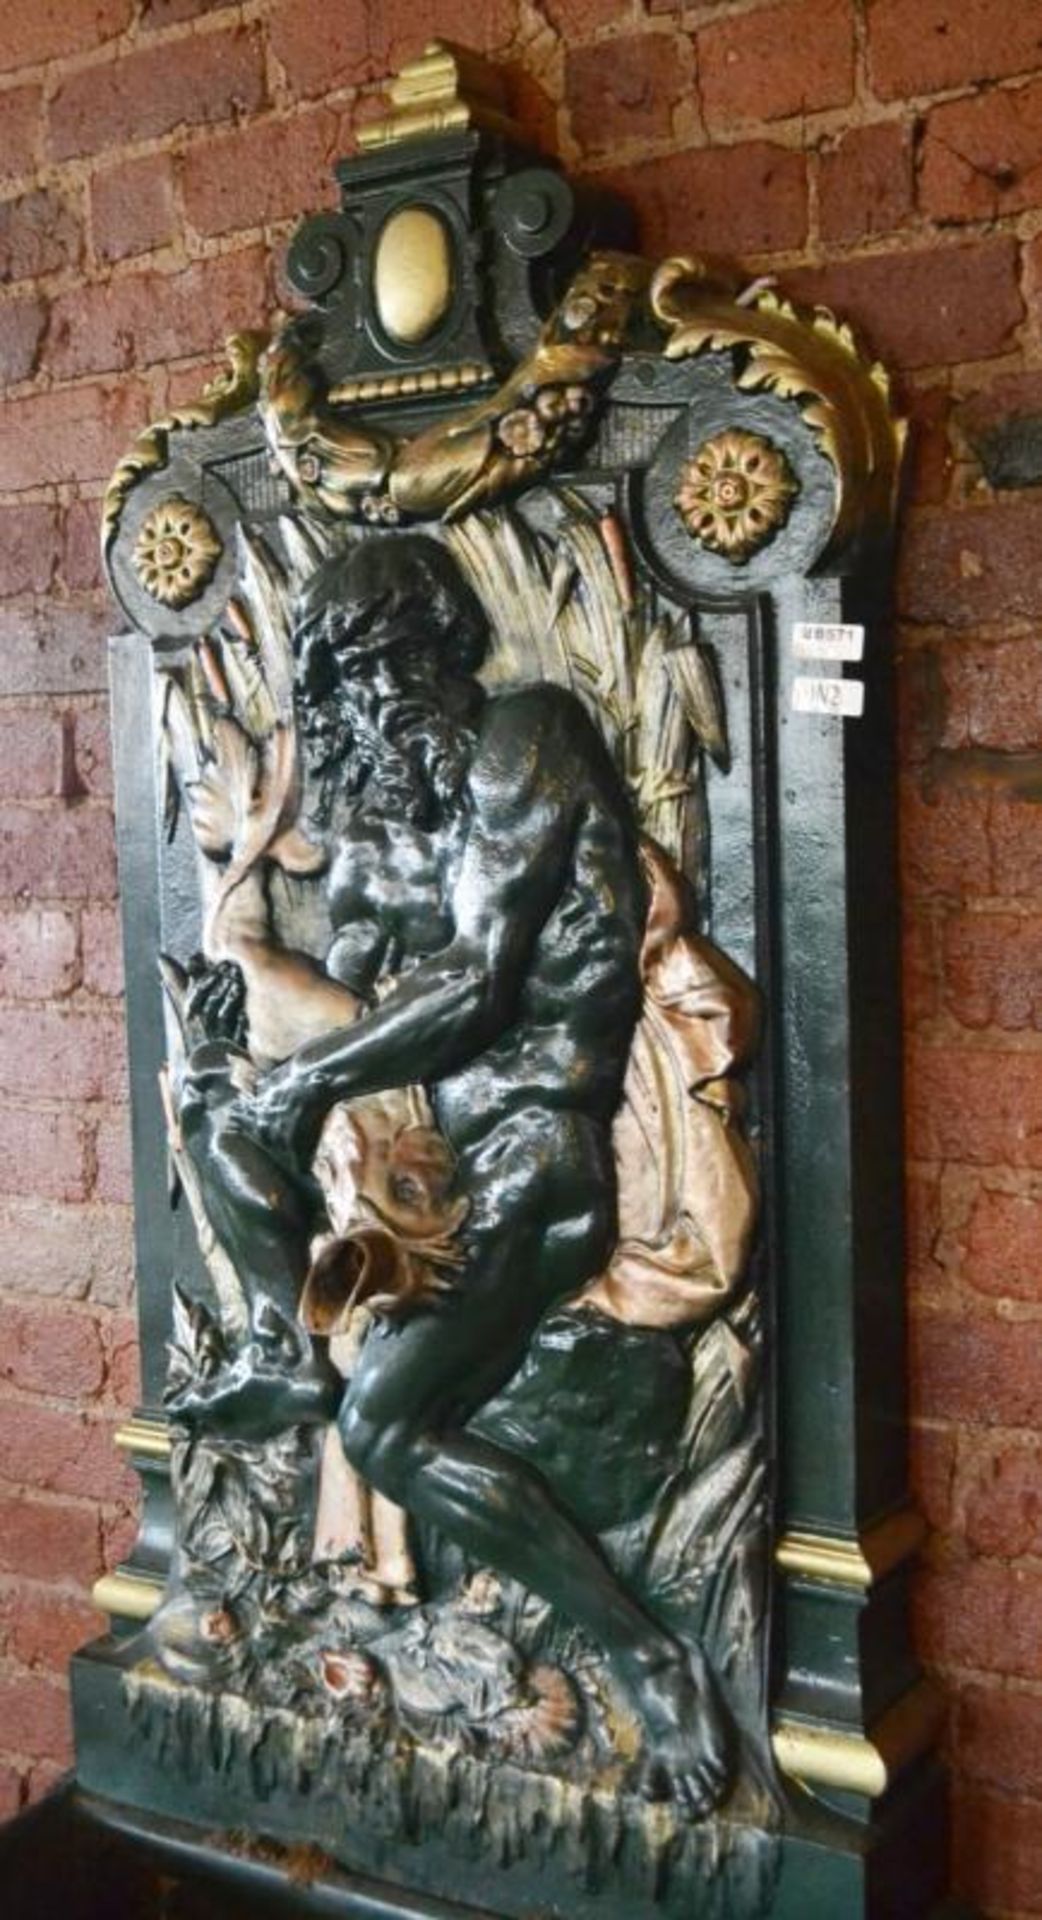 1 x Cast Metal Water Fountain Depicting Greek Man and Serpent - Finished in Green and Gold - H210 x - Image 11 of 11